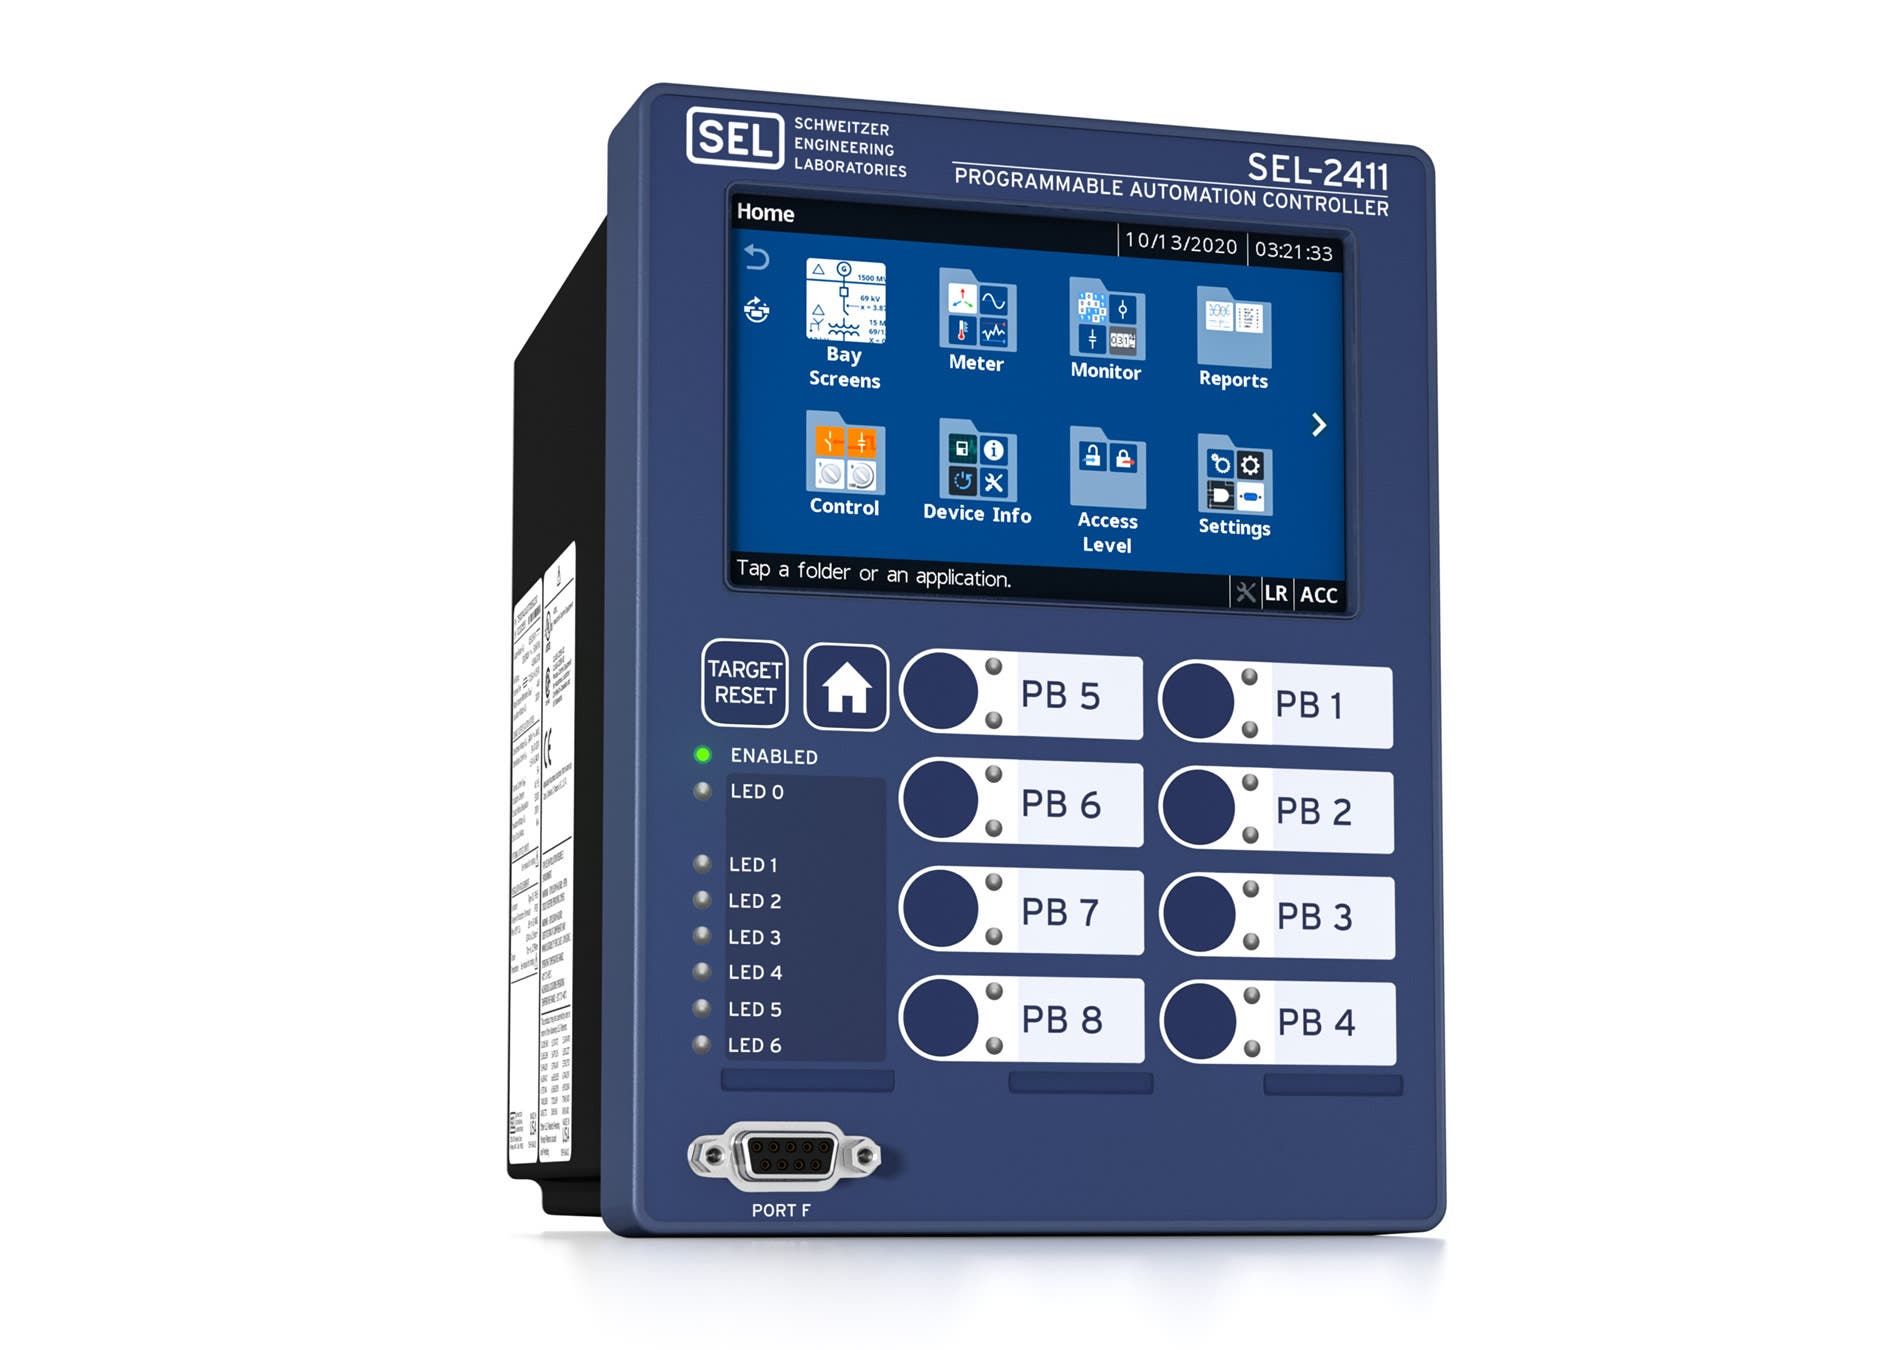 New touchscreen option for SEL-2411 Programmable Automation Controller